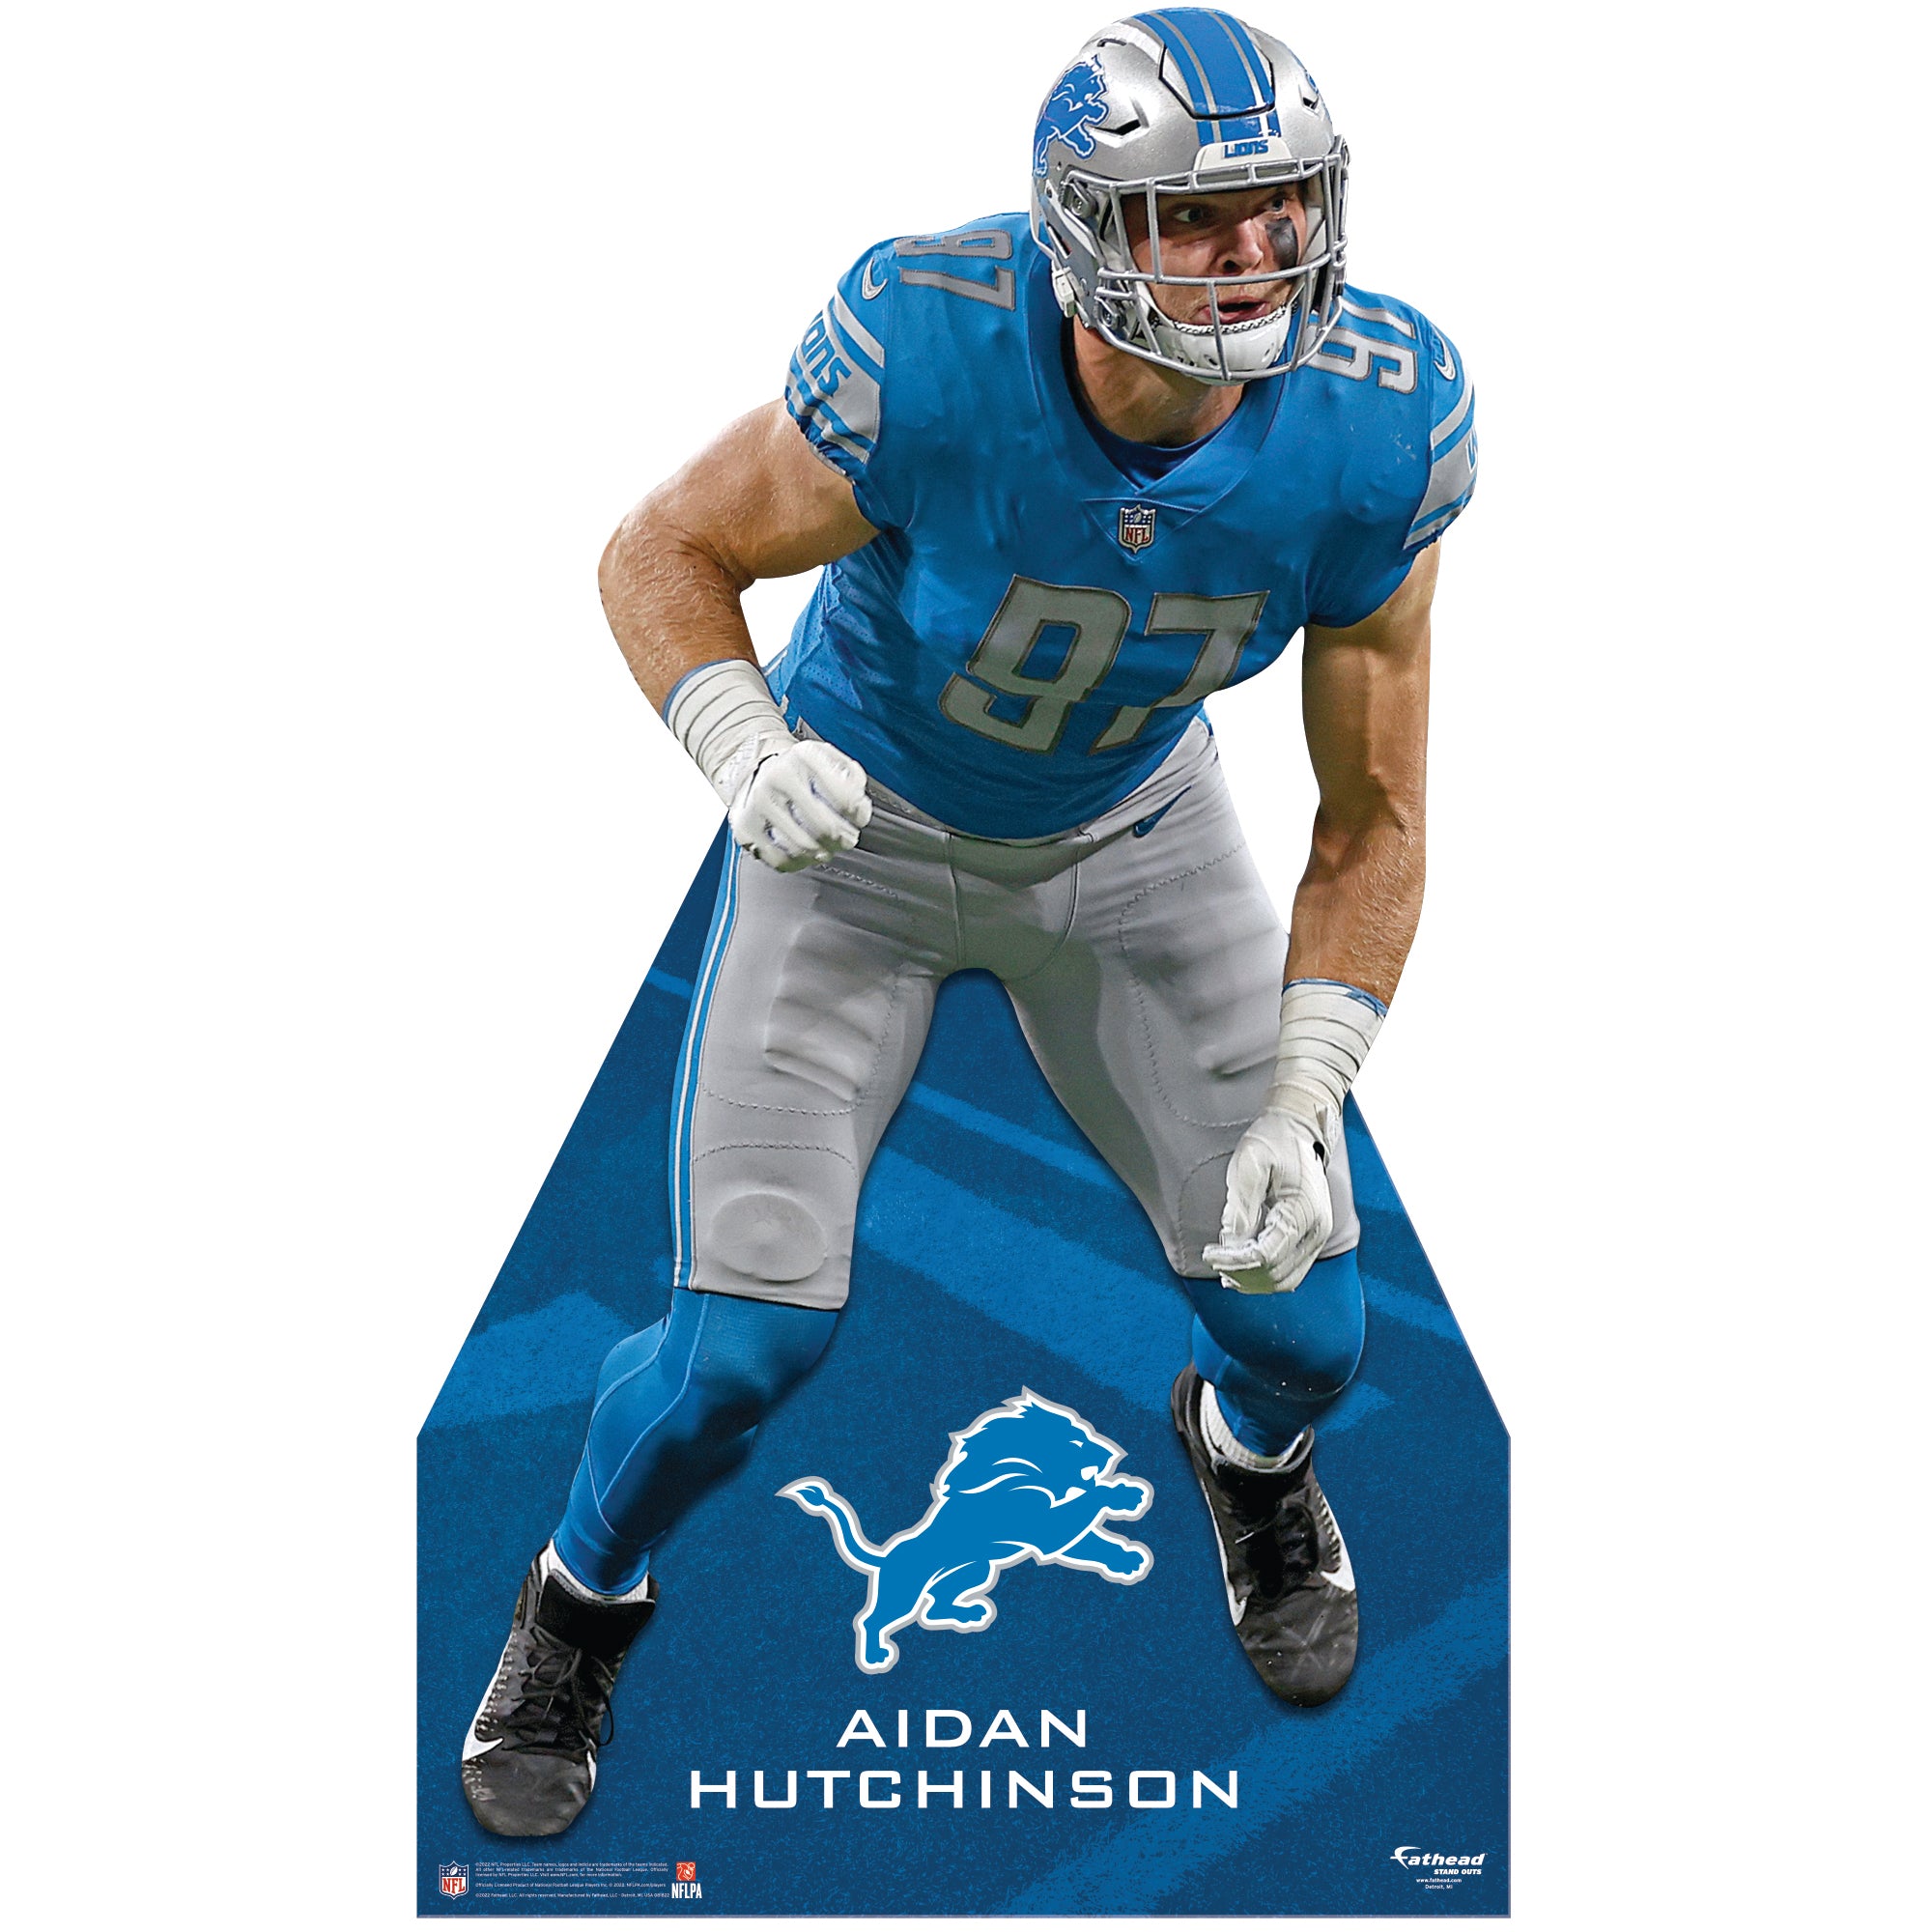 Aidan Hutchinson could still be in play for Lions after all as Jaguars  insist theyre not done on offensive line  mlivecom